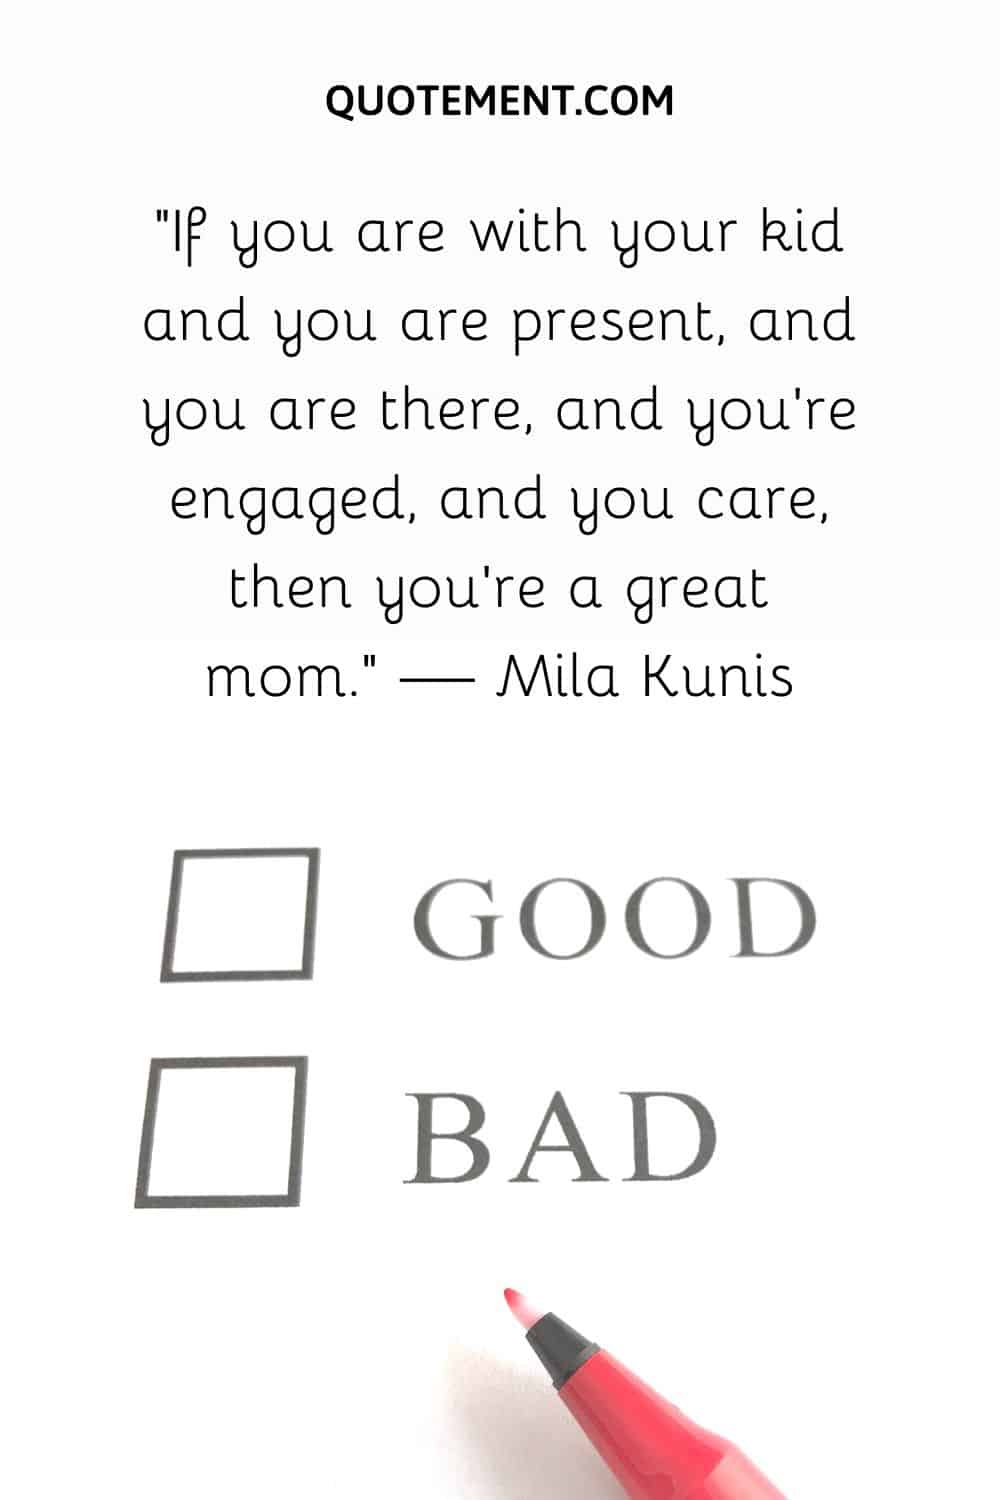 If you are with your kid and you are present, and you are there, and you're engaged, and you care, then you're a great mom